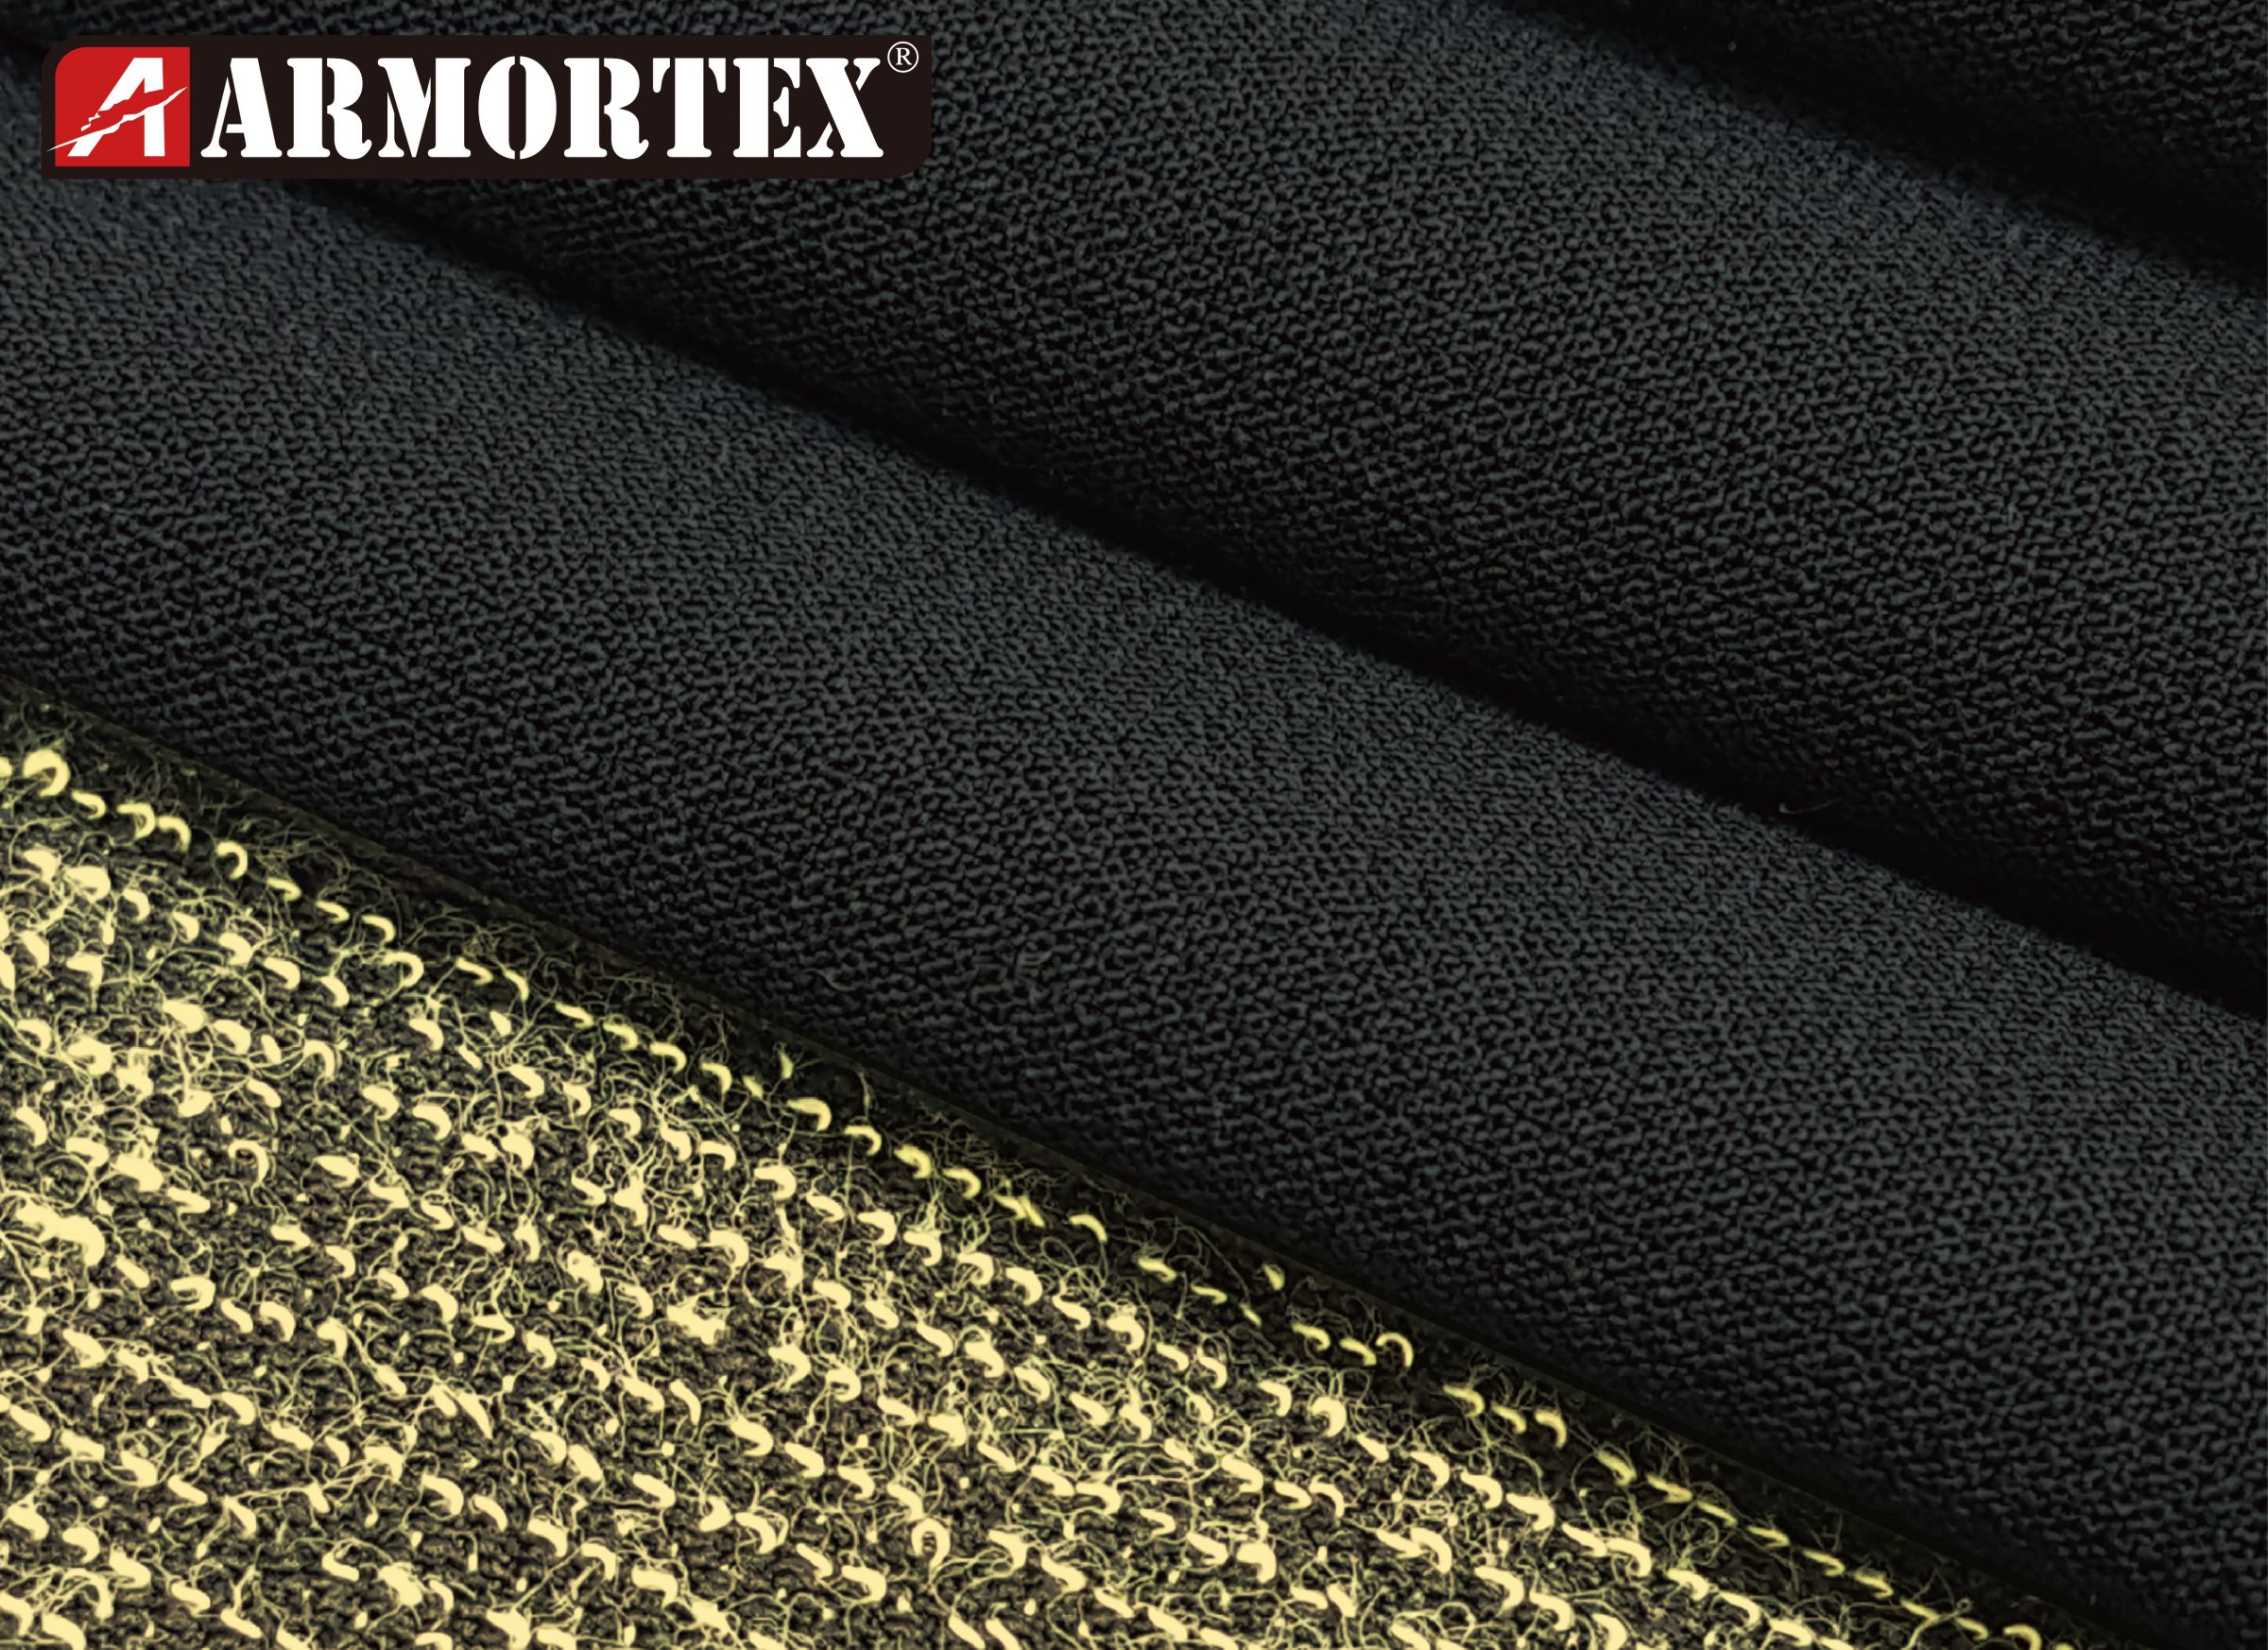 4-Way Stretchable Abrasion Resistant Fabric Made with Kevlar® Nylon -  Kevlar® Abrasion Resistant Fabric, Made in Taiwan Textile Fabric  Manufacturer with ESG Reports